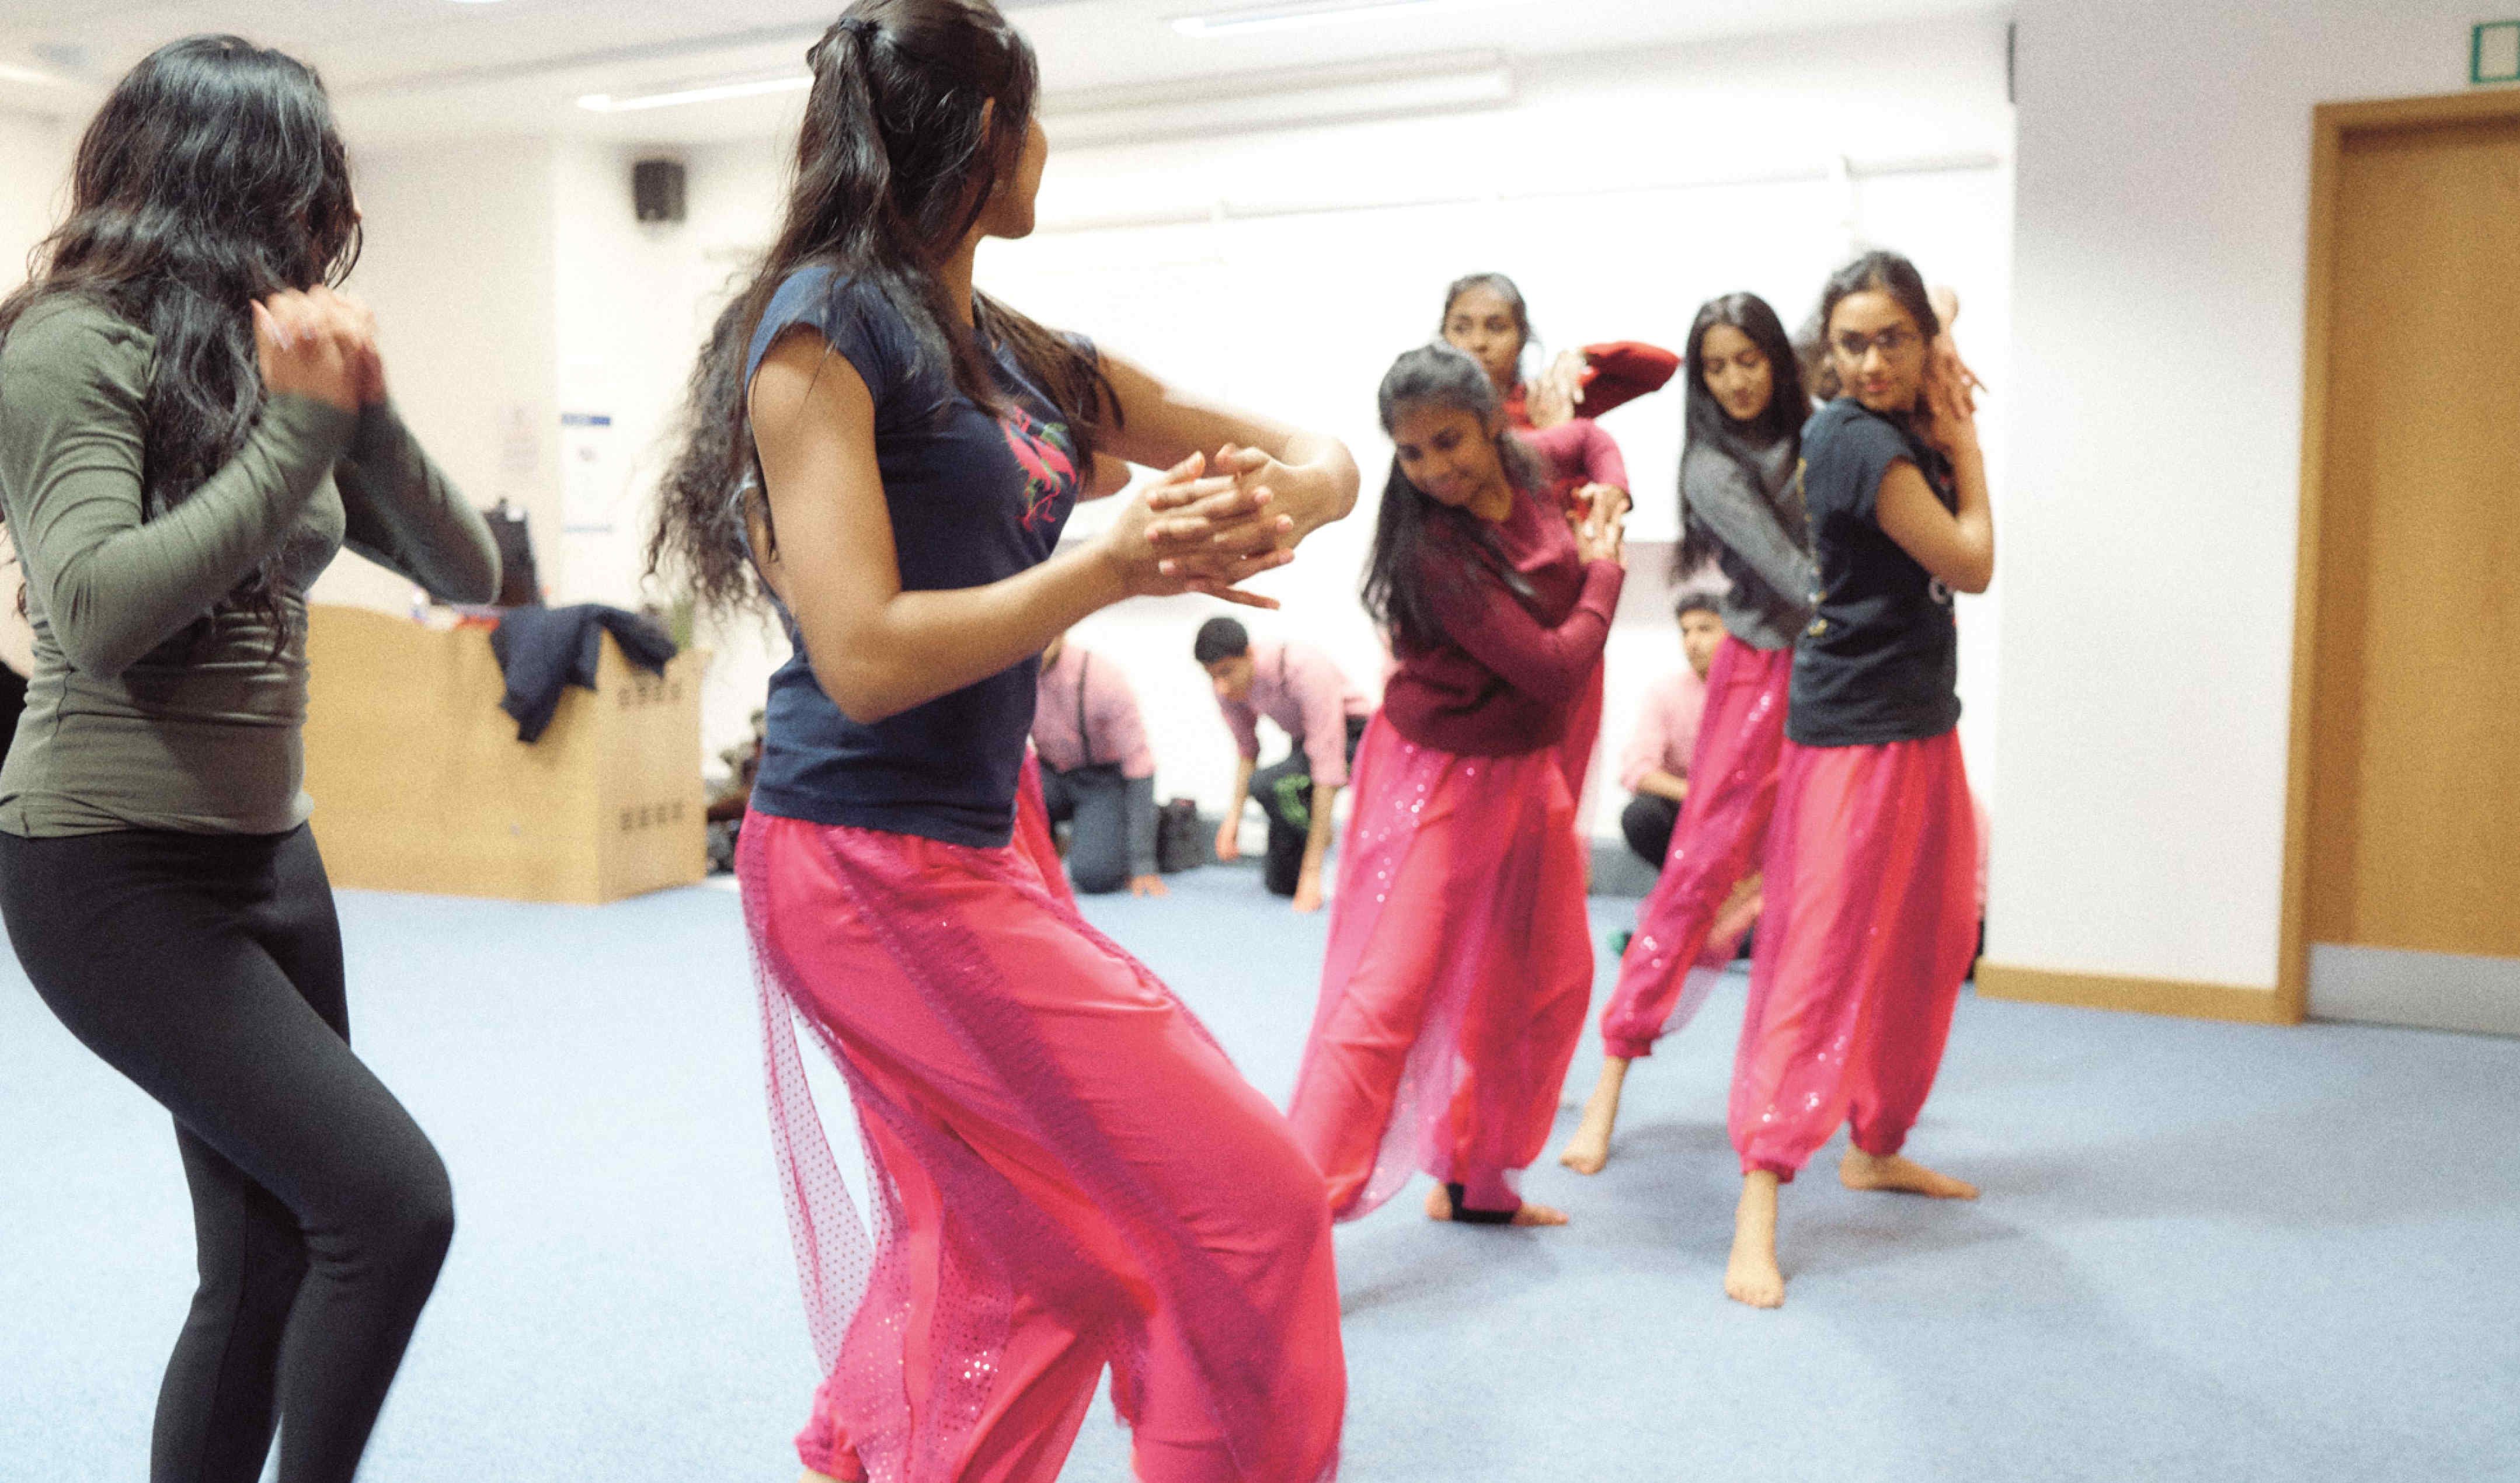 Members of Imperial's Indian Society rehearse a dance